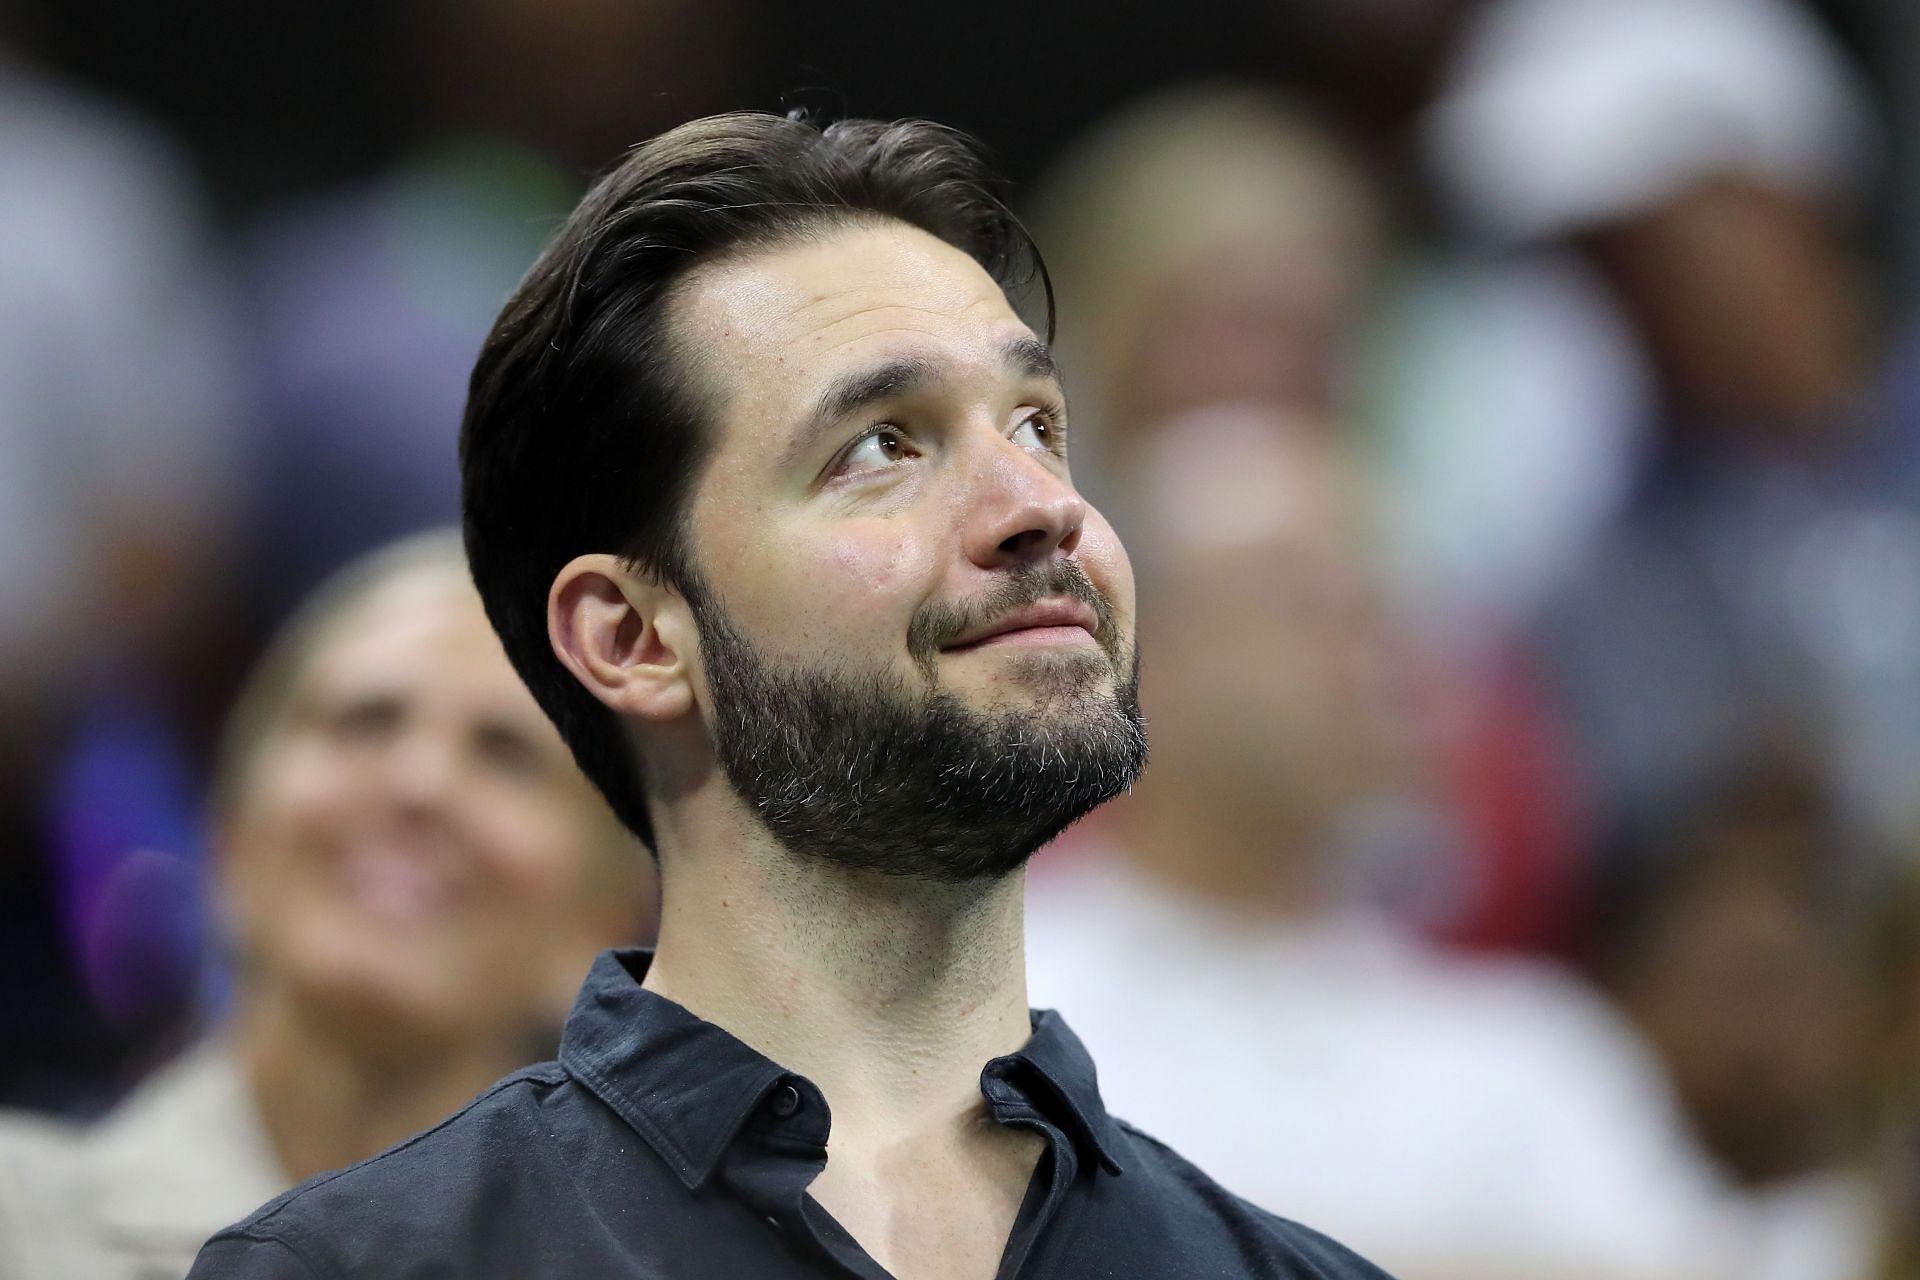 Serena Williams&#039; husband Alexis Ohanian at the 2018 US Open